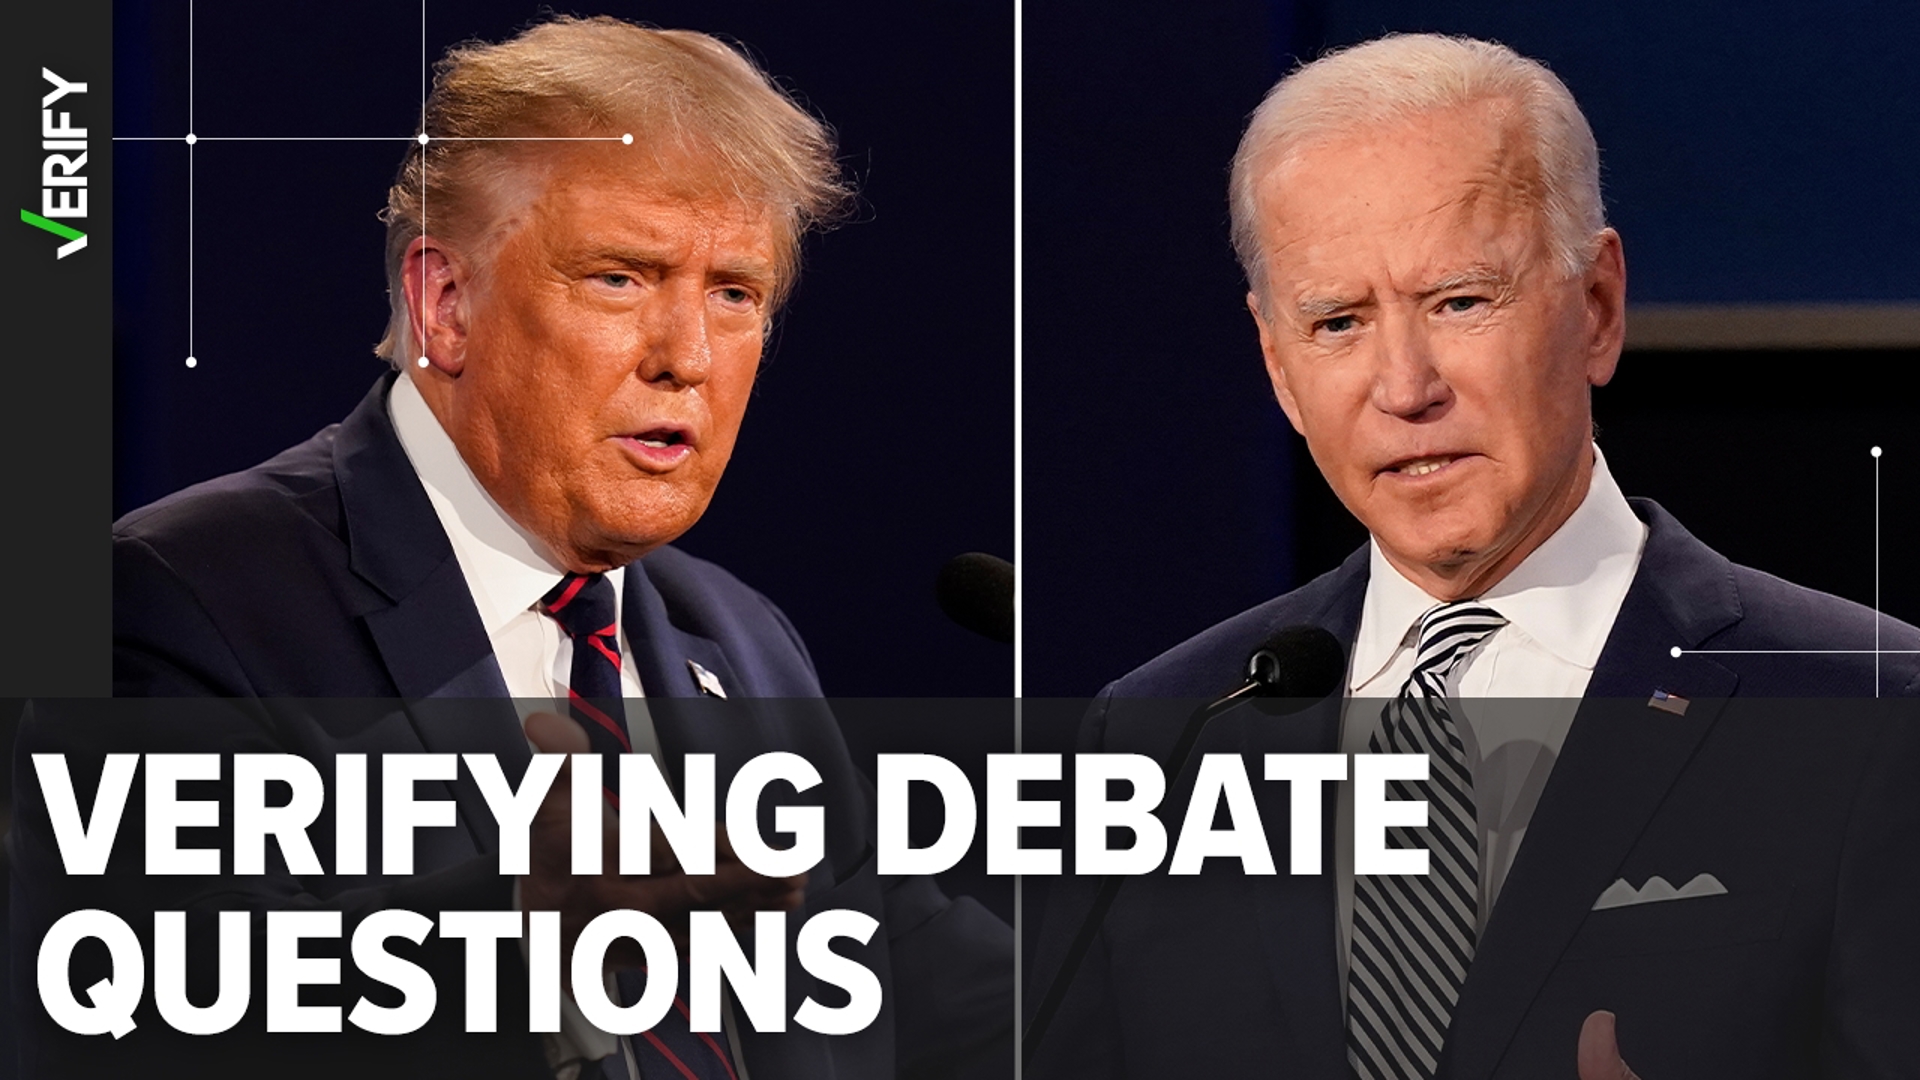 We VERIFY if this is the first debate since 1960 to not have a live audience, if candidates can wear earbuds and if candidates get the questions in advance.